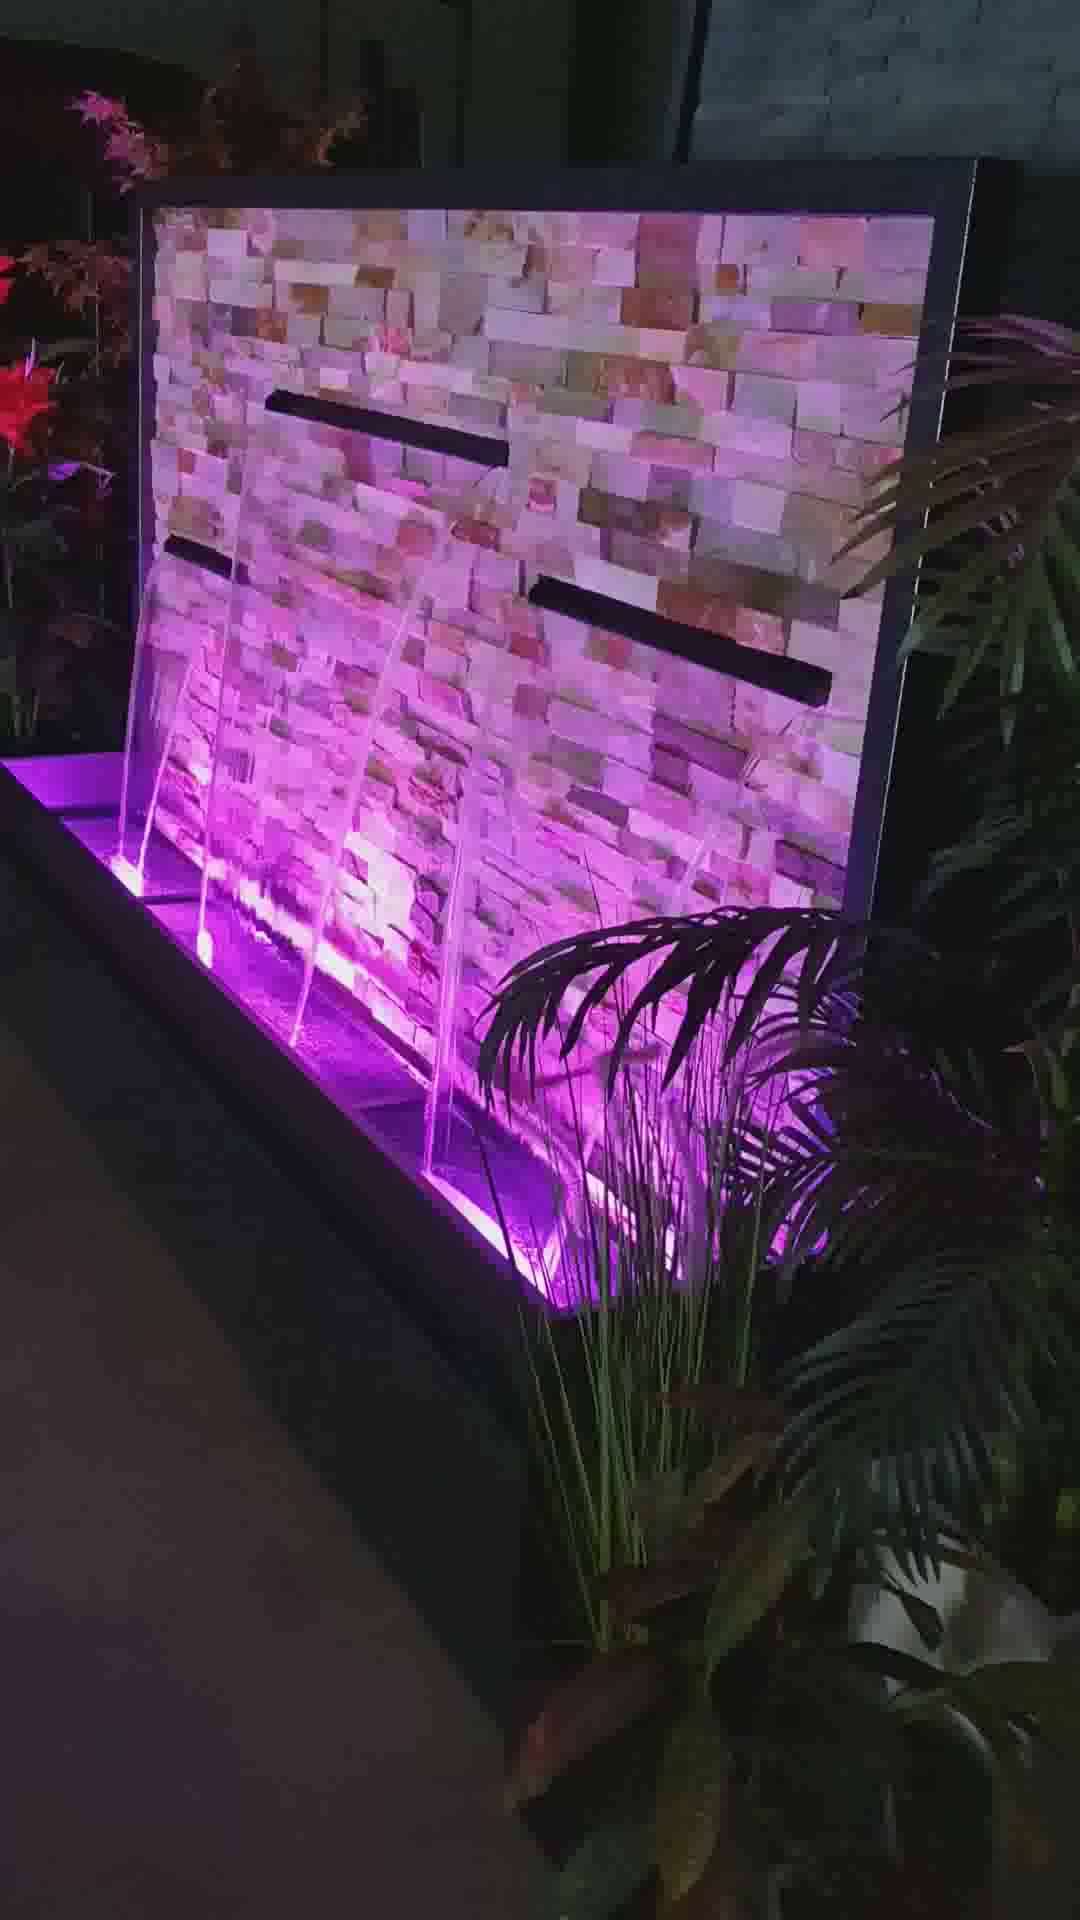 Fancy water fountains, amazing lights with super solid construction.
All your needs we are here to help. 

#construction #constructioncompany #civilengineer #civilwork #architect #interiordesign #trendingdesigns  #bhopalcontractor  #interior_designer_in_bhopal #bhopalinteriors #fountain #waterfountains  #bhopalfurnitures #radiantstarconstruction